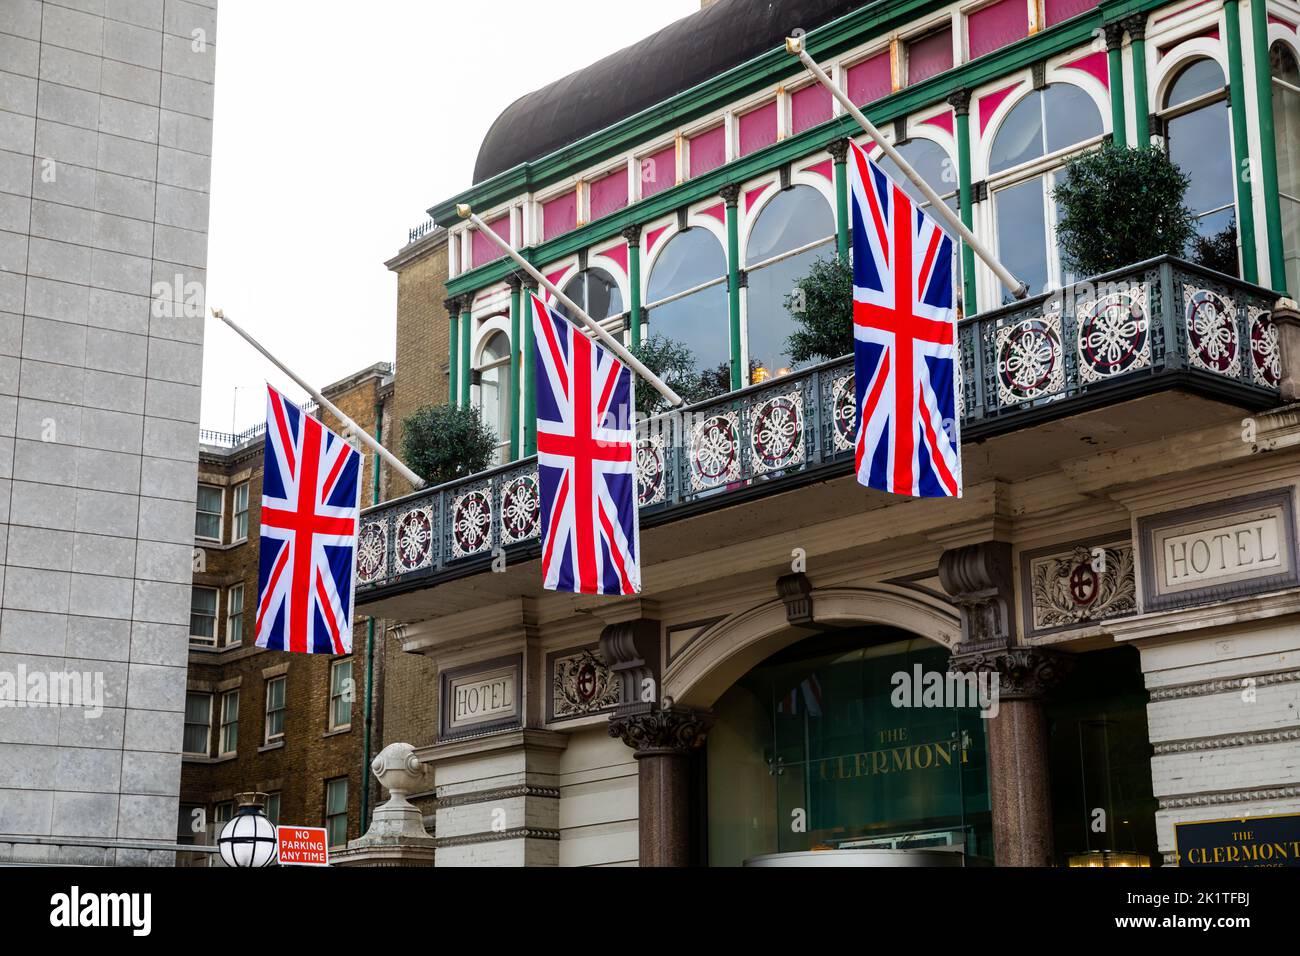 Union Jack flags hang outside a hotel in London Stock Photo